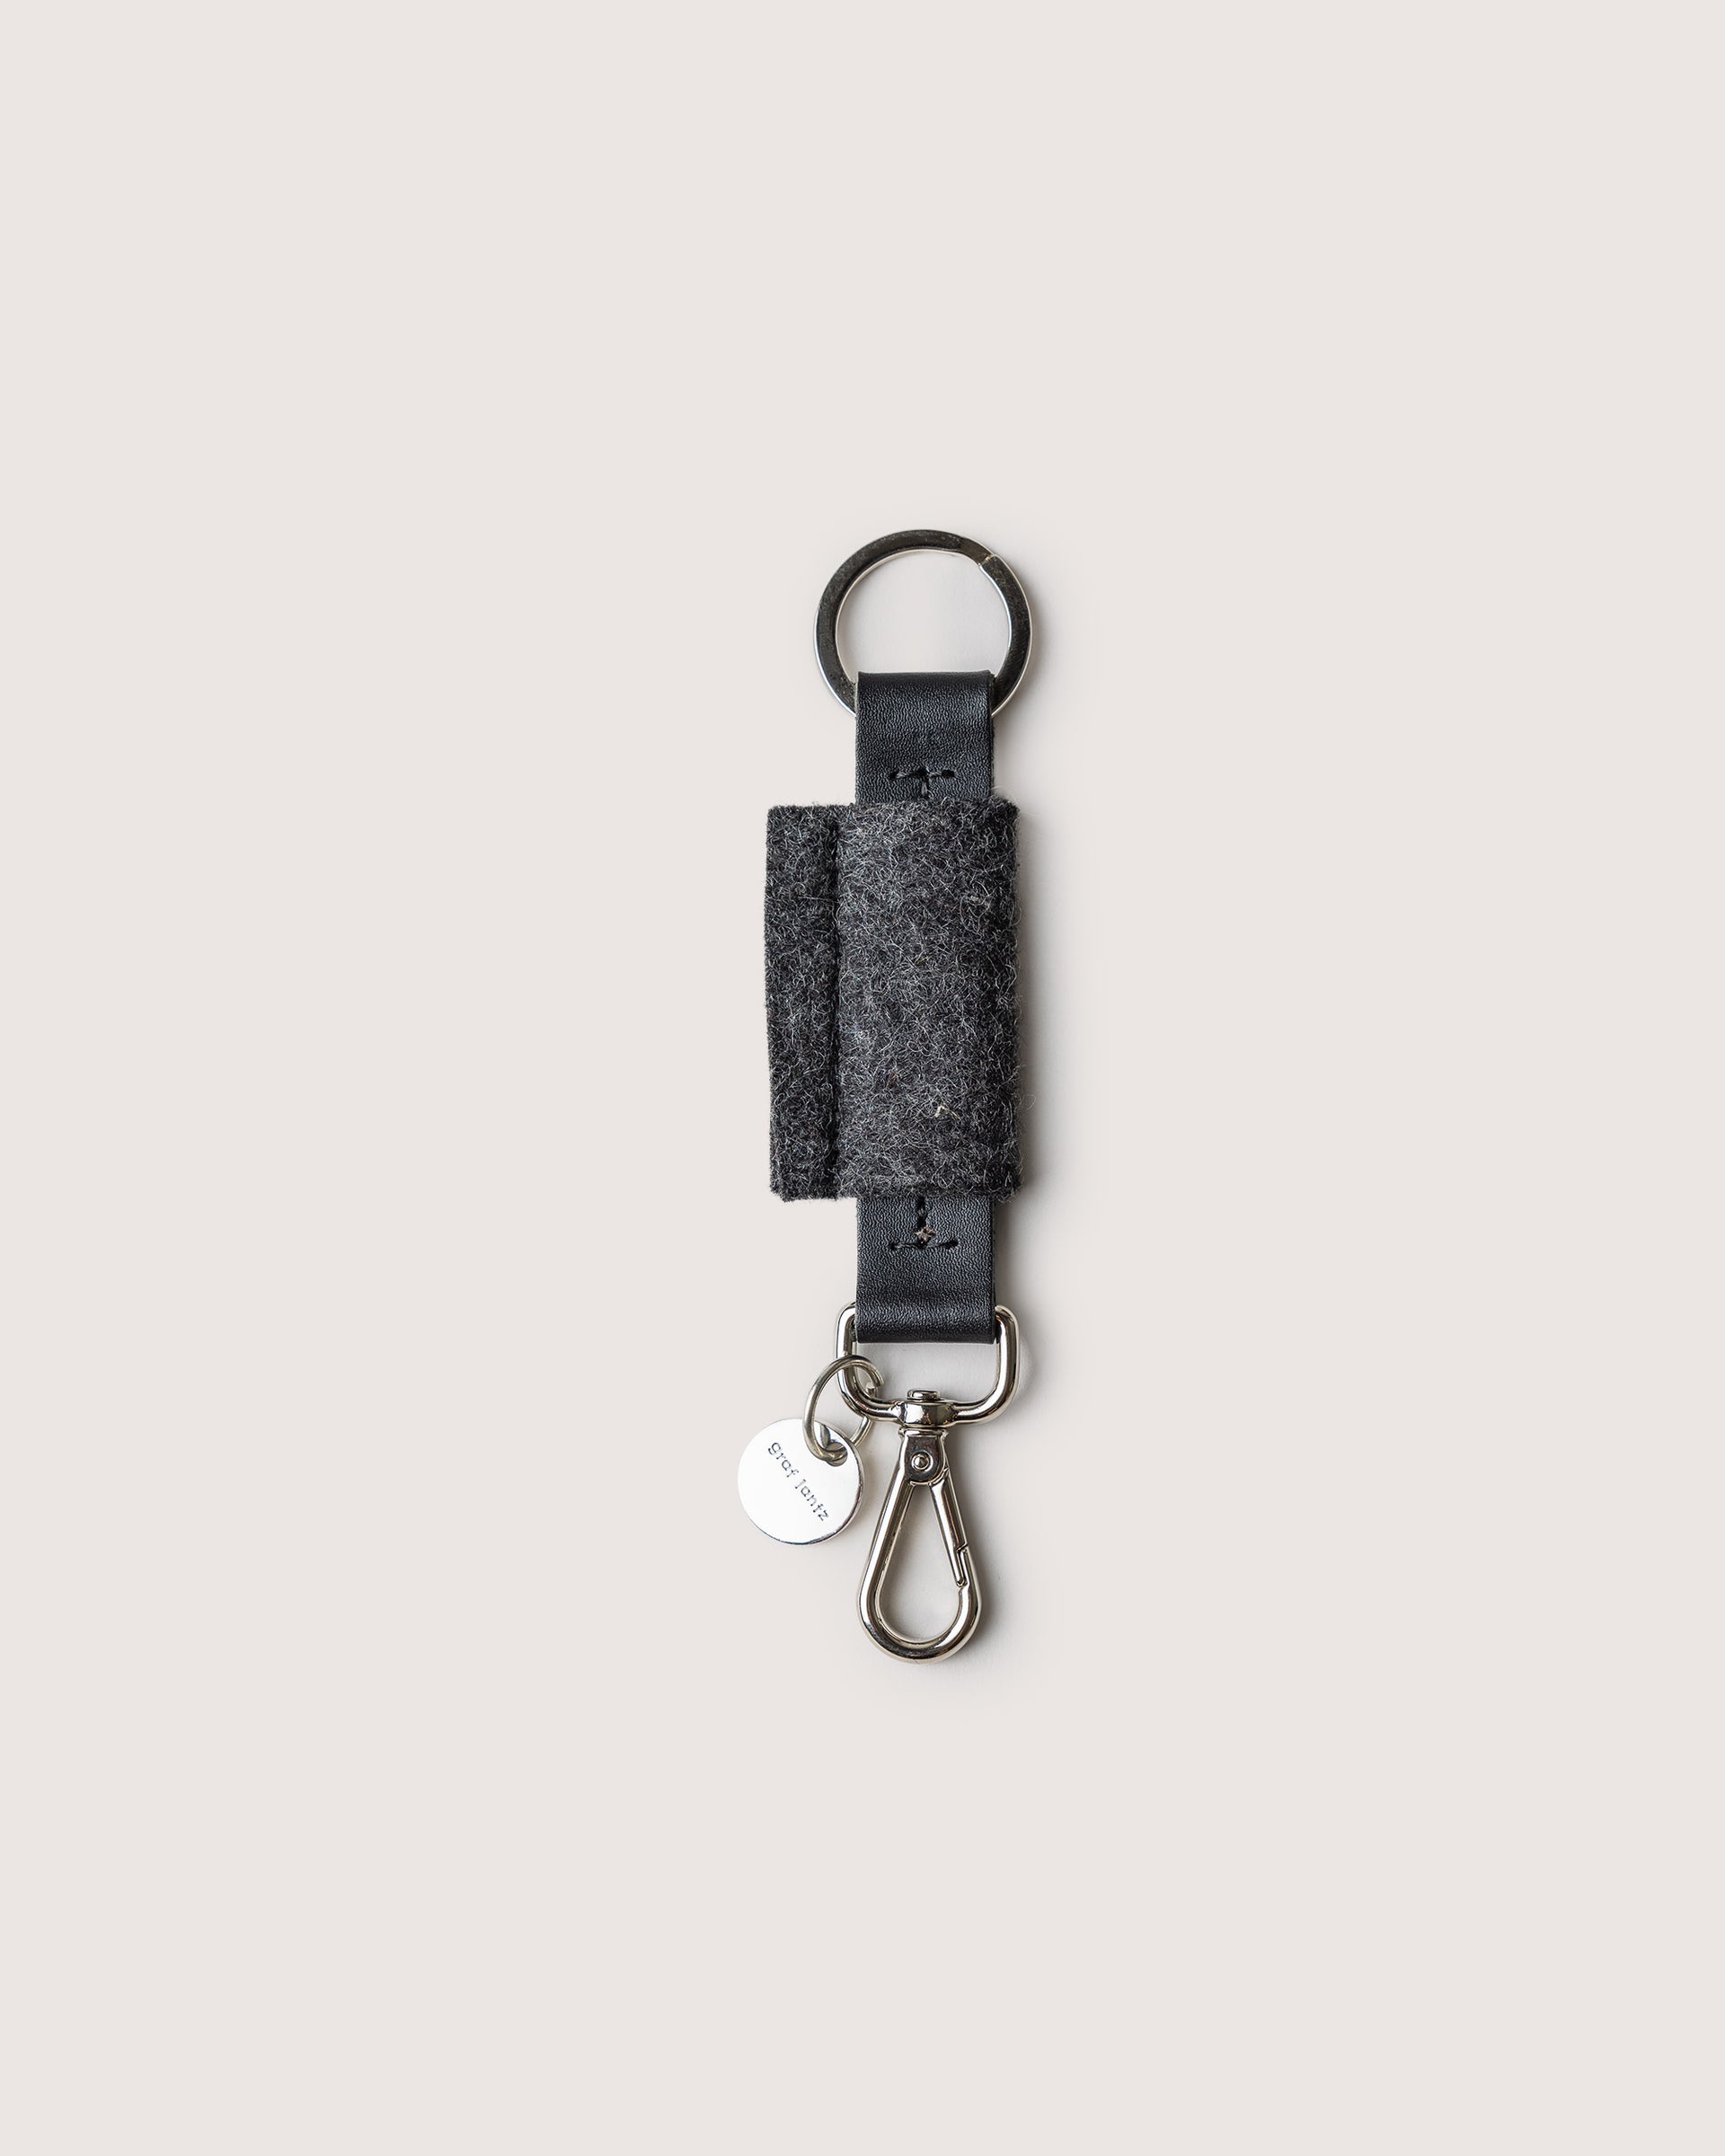 Merino Wool Bar Key Fob in charcoal with silver colored key ring, lobster clasp, and brand logo, white background.